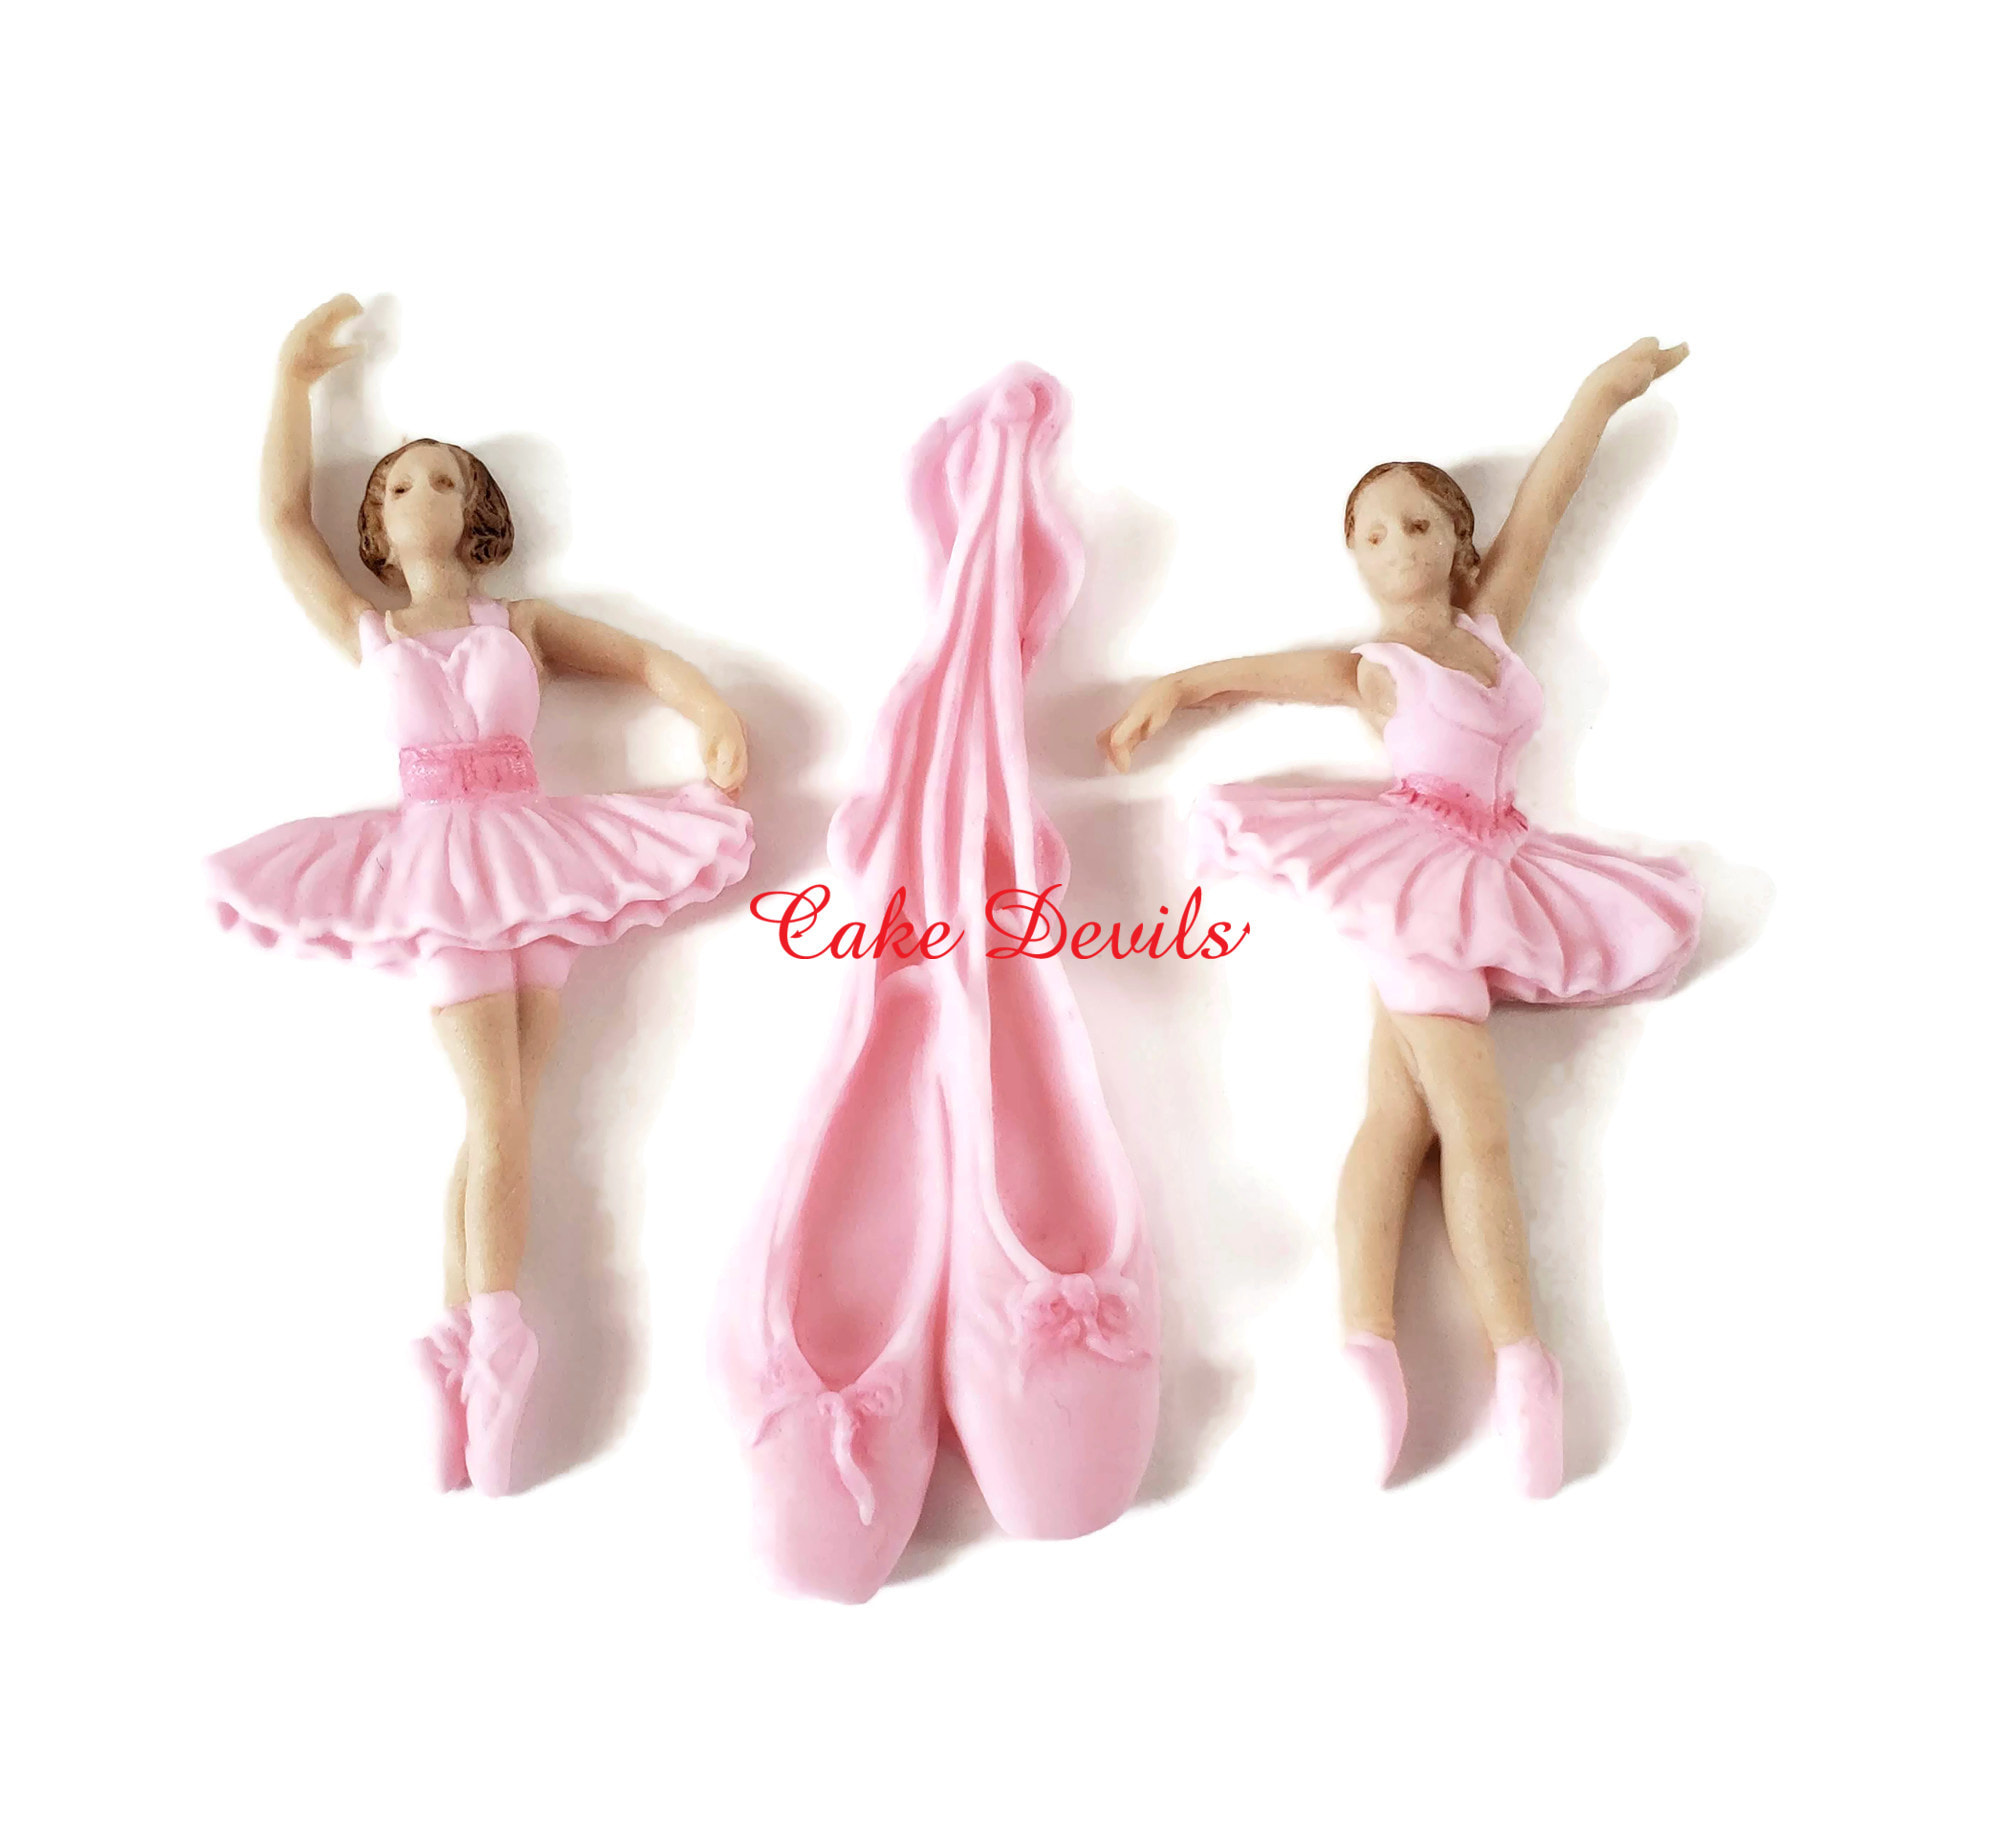 BALLERINA 19cm Cake Topper Edible Icing Image Birthday Party Decoration #1 